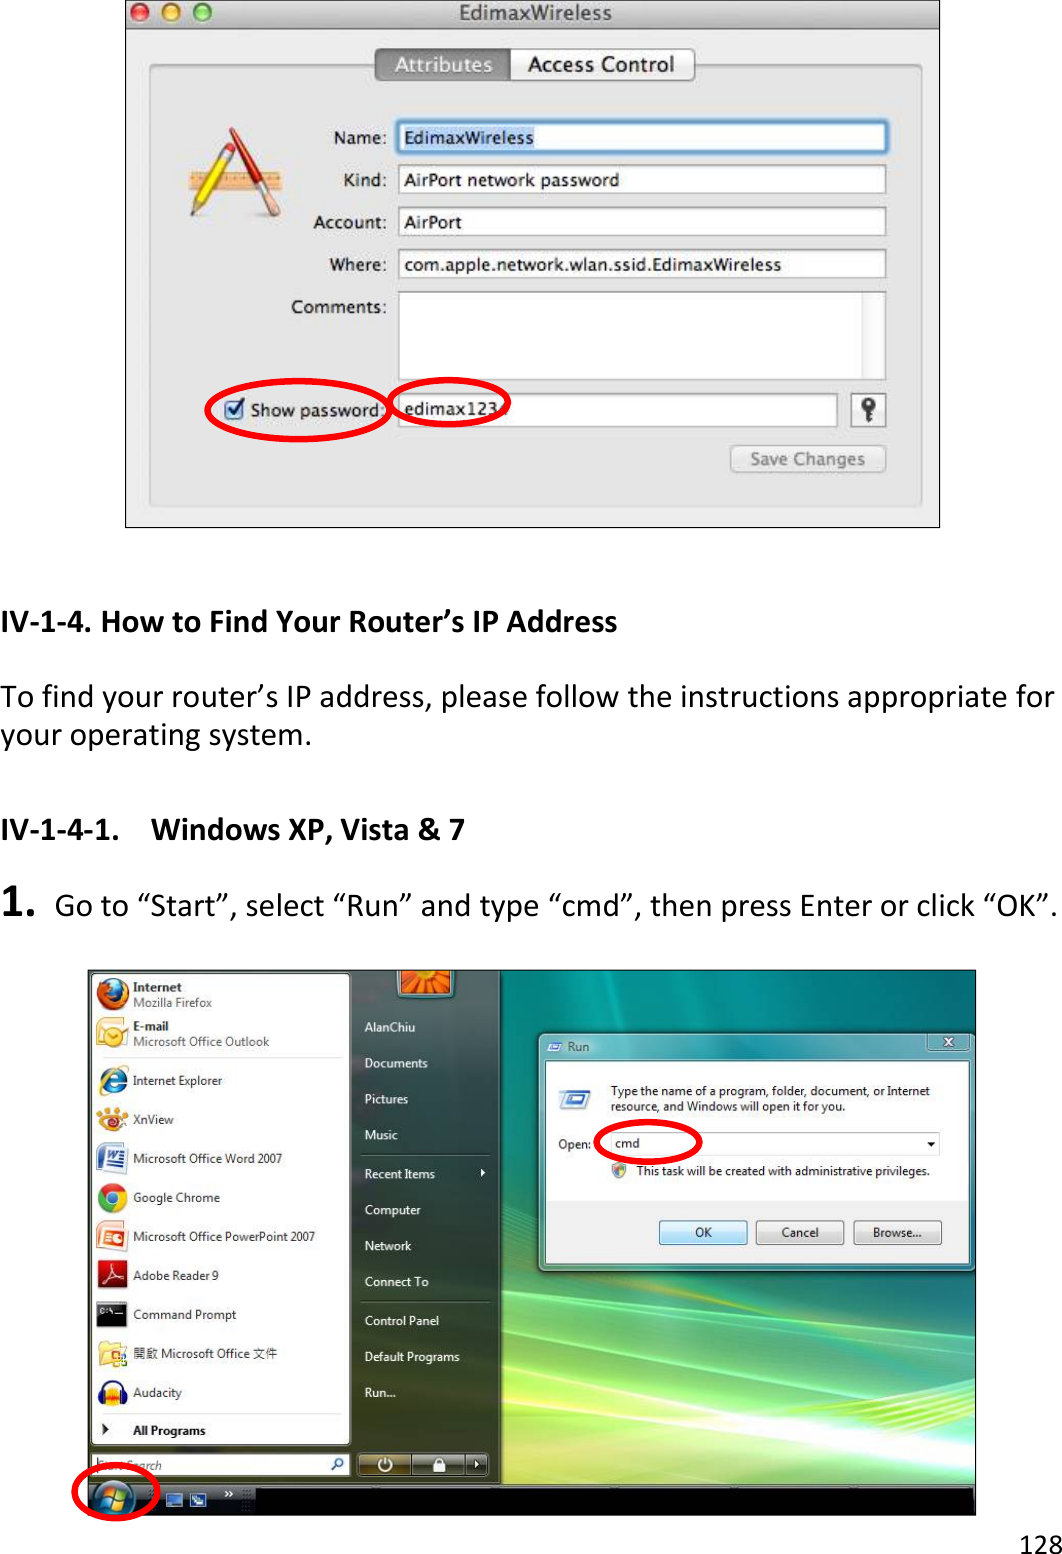 128    IV-1-4. How to Find Your Router’s IP Address  To find your router’s IP address, please follow the instructions appropriate for your operating system.  IV-1-4-1.  Windows XP, Vista &amp; 7  1.   Go to “Start”, select “Run” and type “cmd”, then press Enter or click “OK”.   